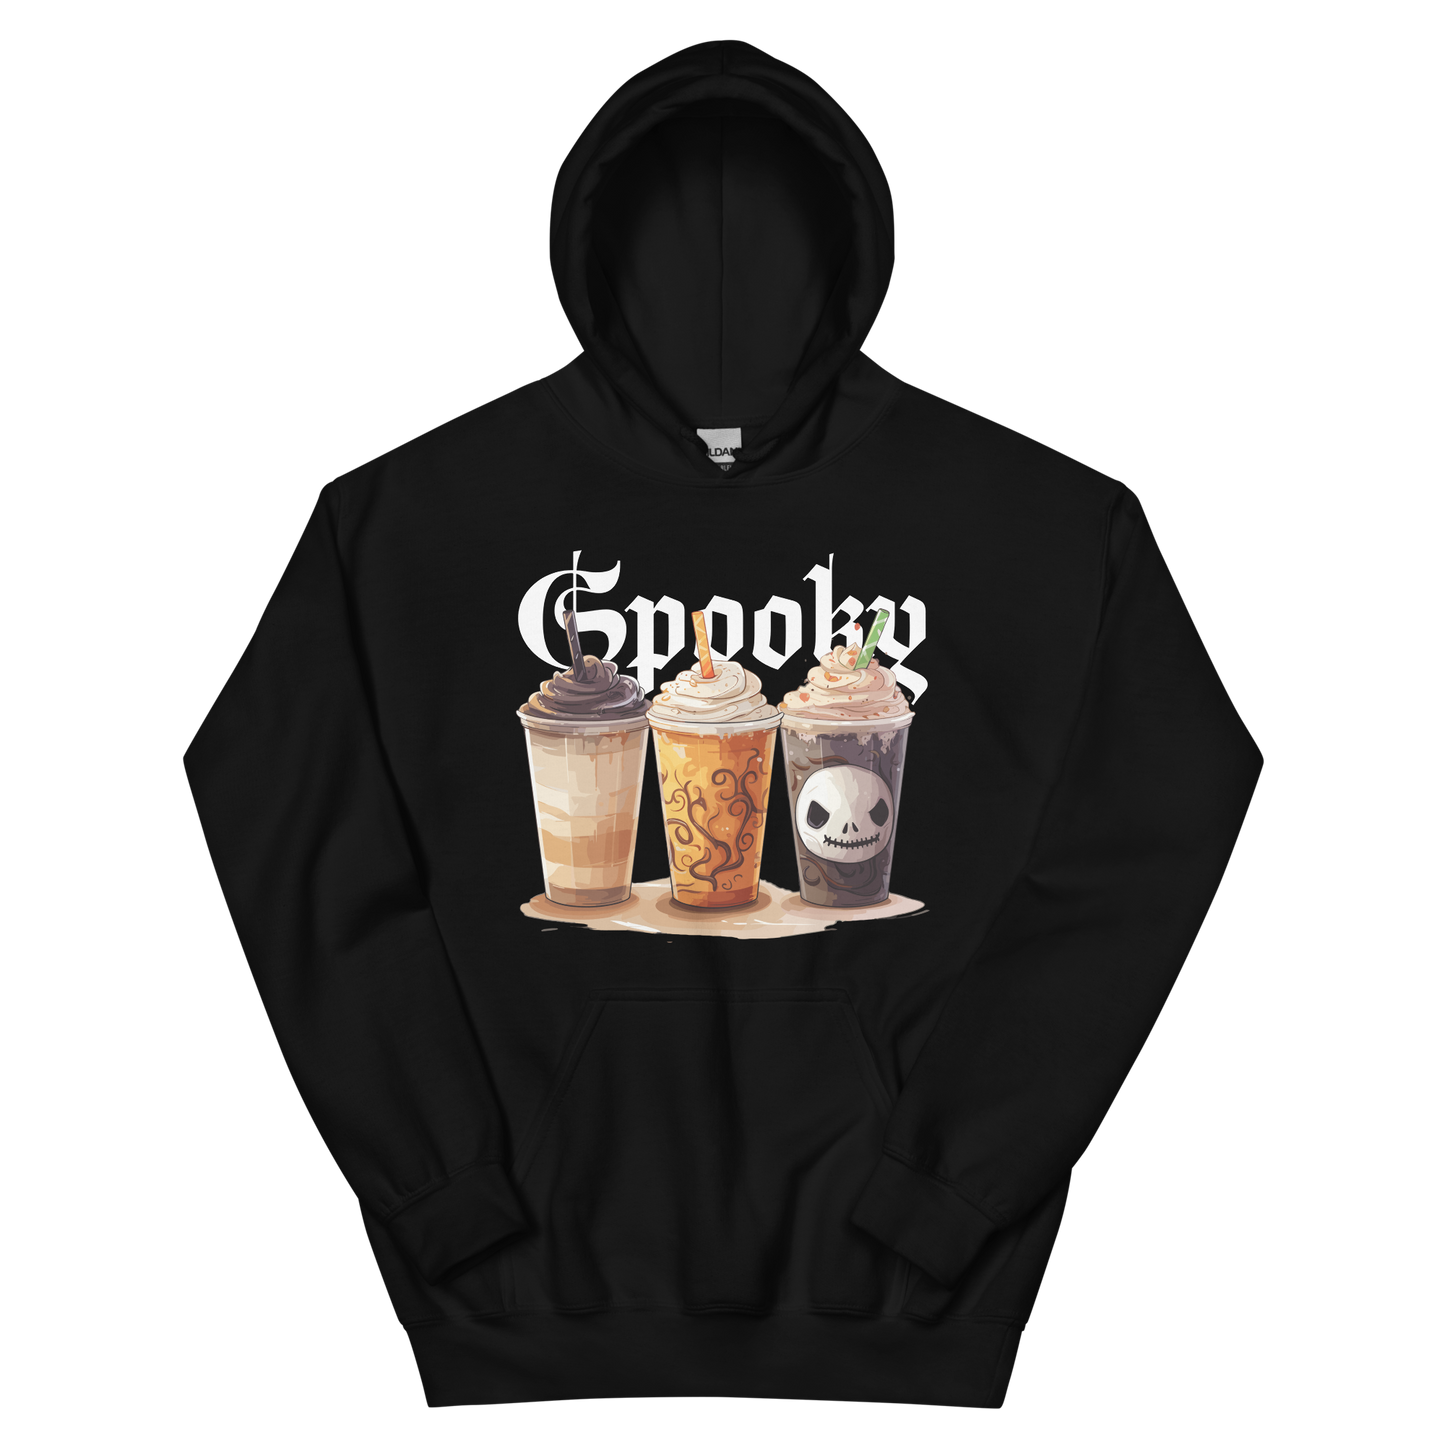 Spooky Drinks Unisex Hoodie, Casual Adult Hoodies Sweatshirt for Men Women, Comfortable Fabric, Pullover with Pockets Unisex